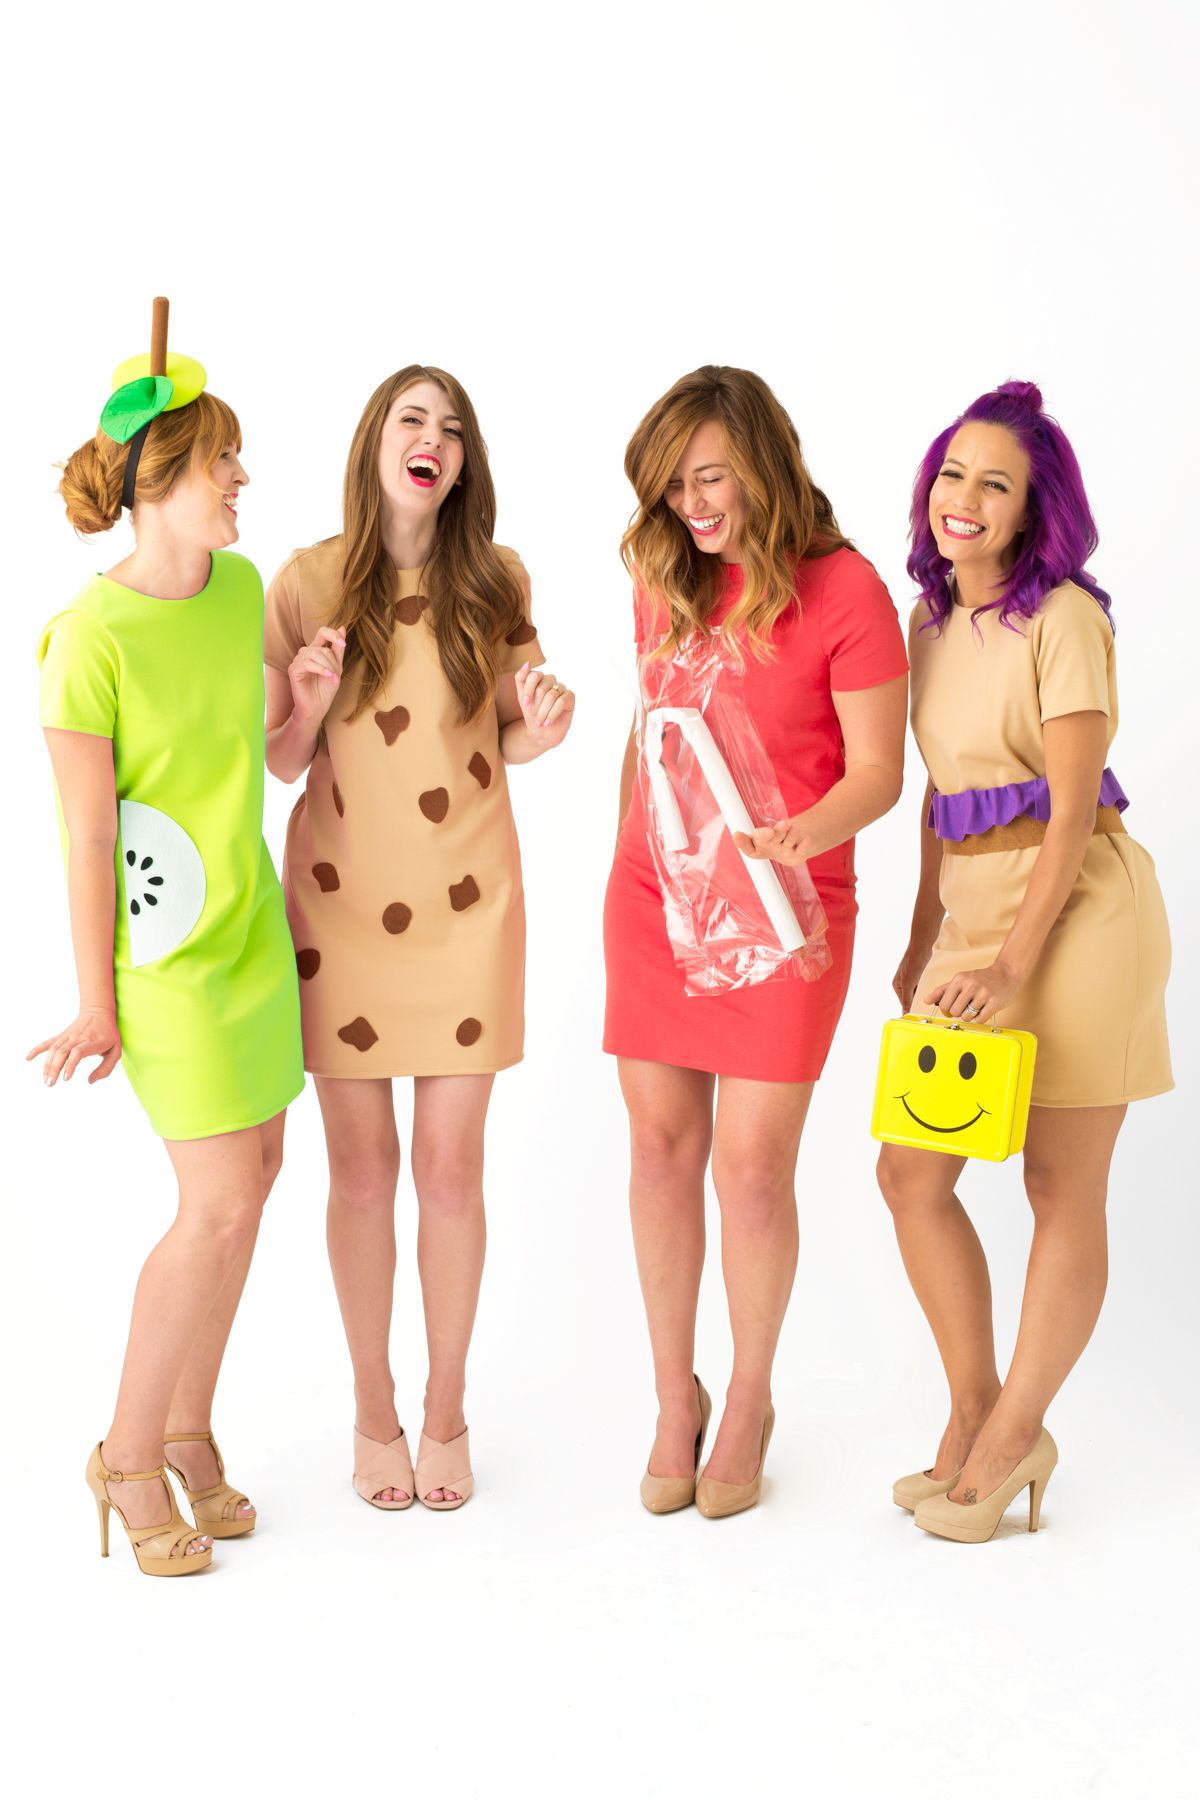 50 Best Work-Appropriate Halloween Costumes to Wear to the Office